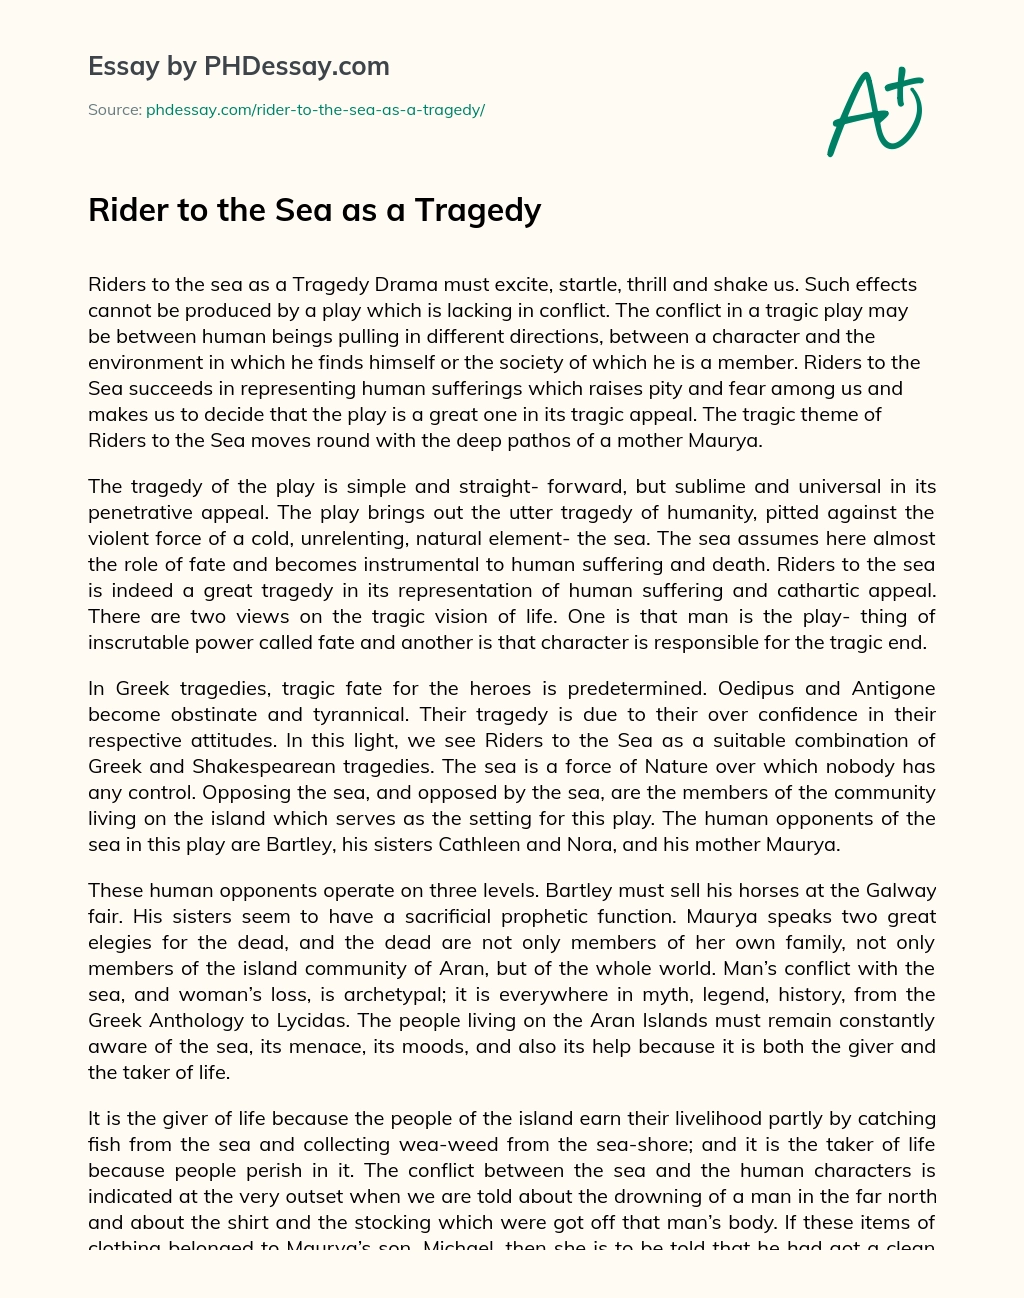 Rider to the Sea as a Tragedy essay